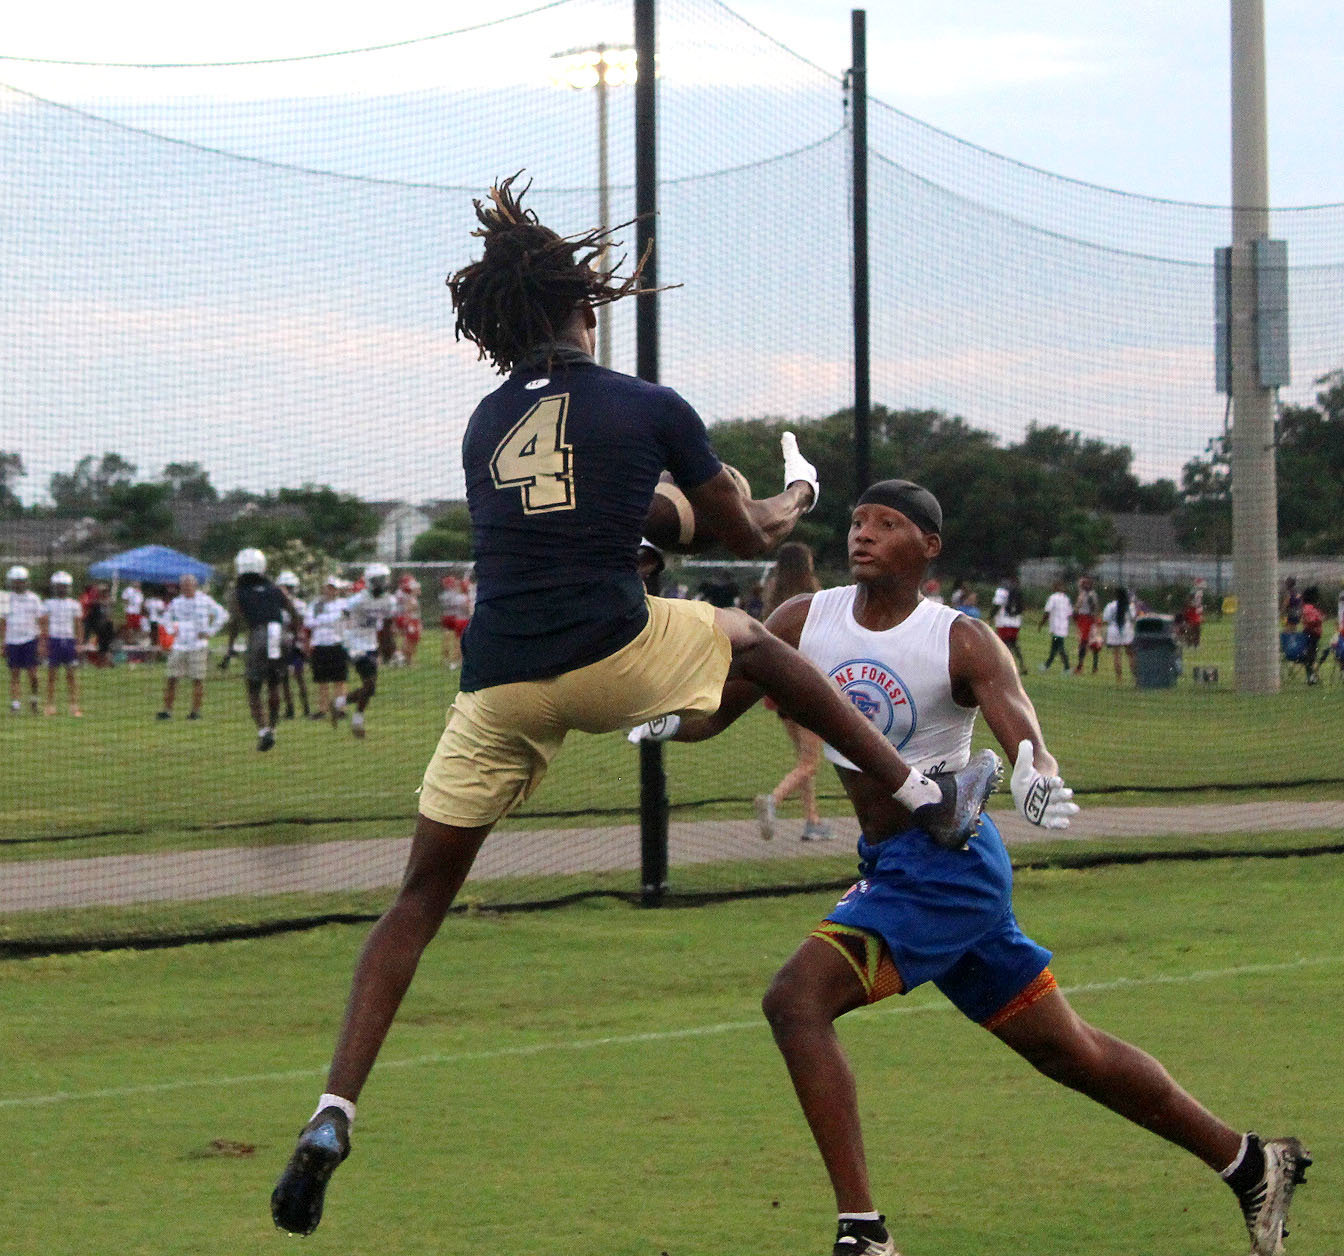 Foley receiver Makai Mitchell hauls in a touchdown pass in front of a Pine Forest defender in the Lions’ contest against the Eagles last Wednesday, June 29, on day one of the Foley 7-on-7 Showdown at OWA.